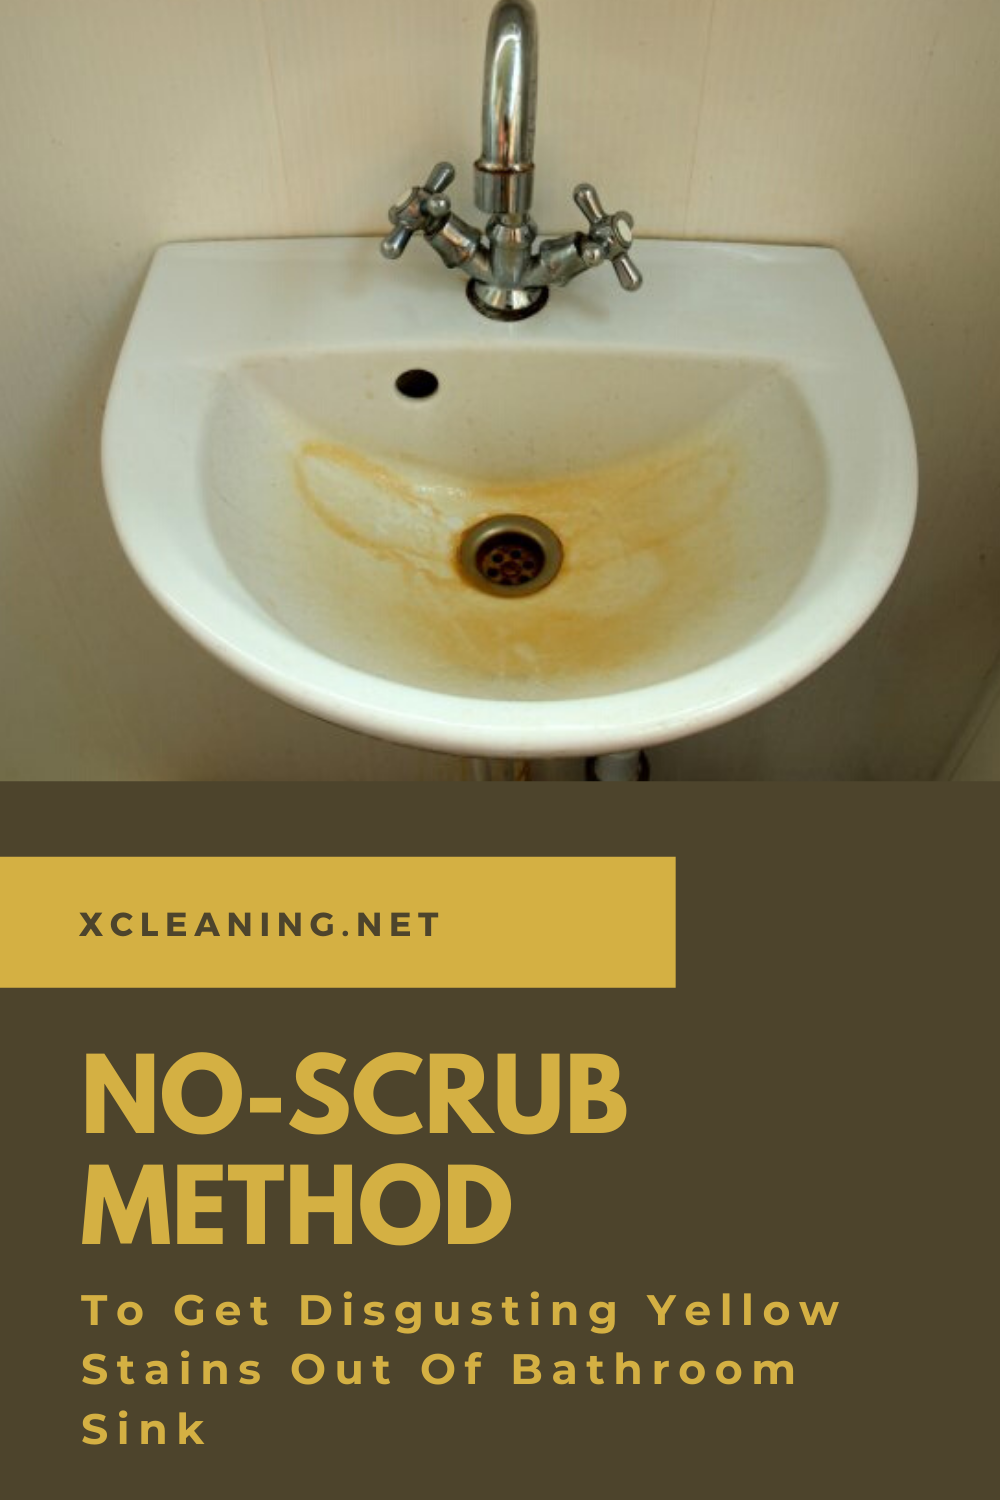 Yellow Stains Out Of Bathroom Sink, How To Remove Yellow Stains From Porcelain Bathtub